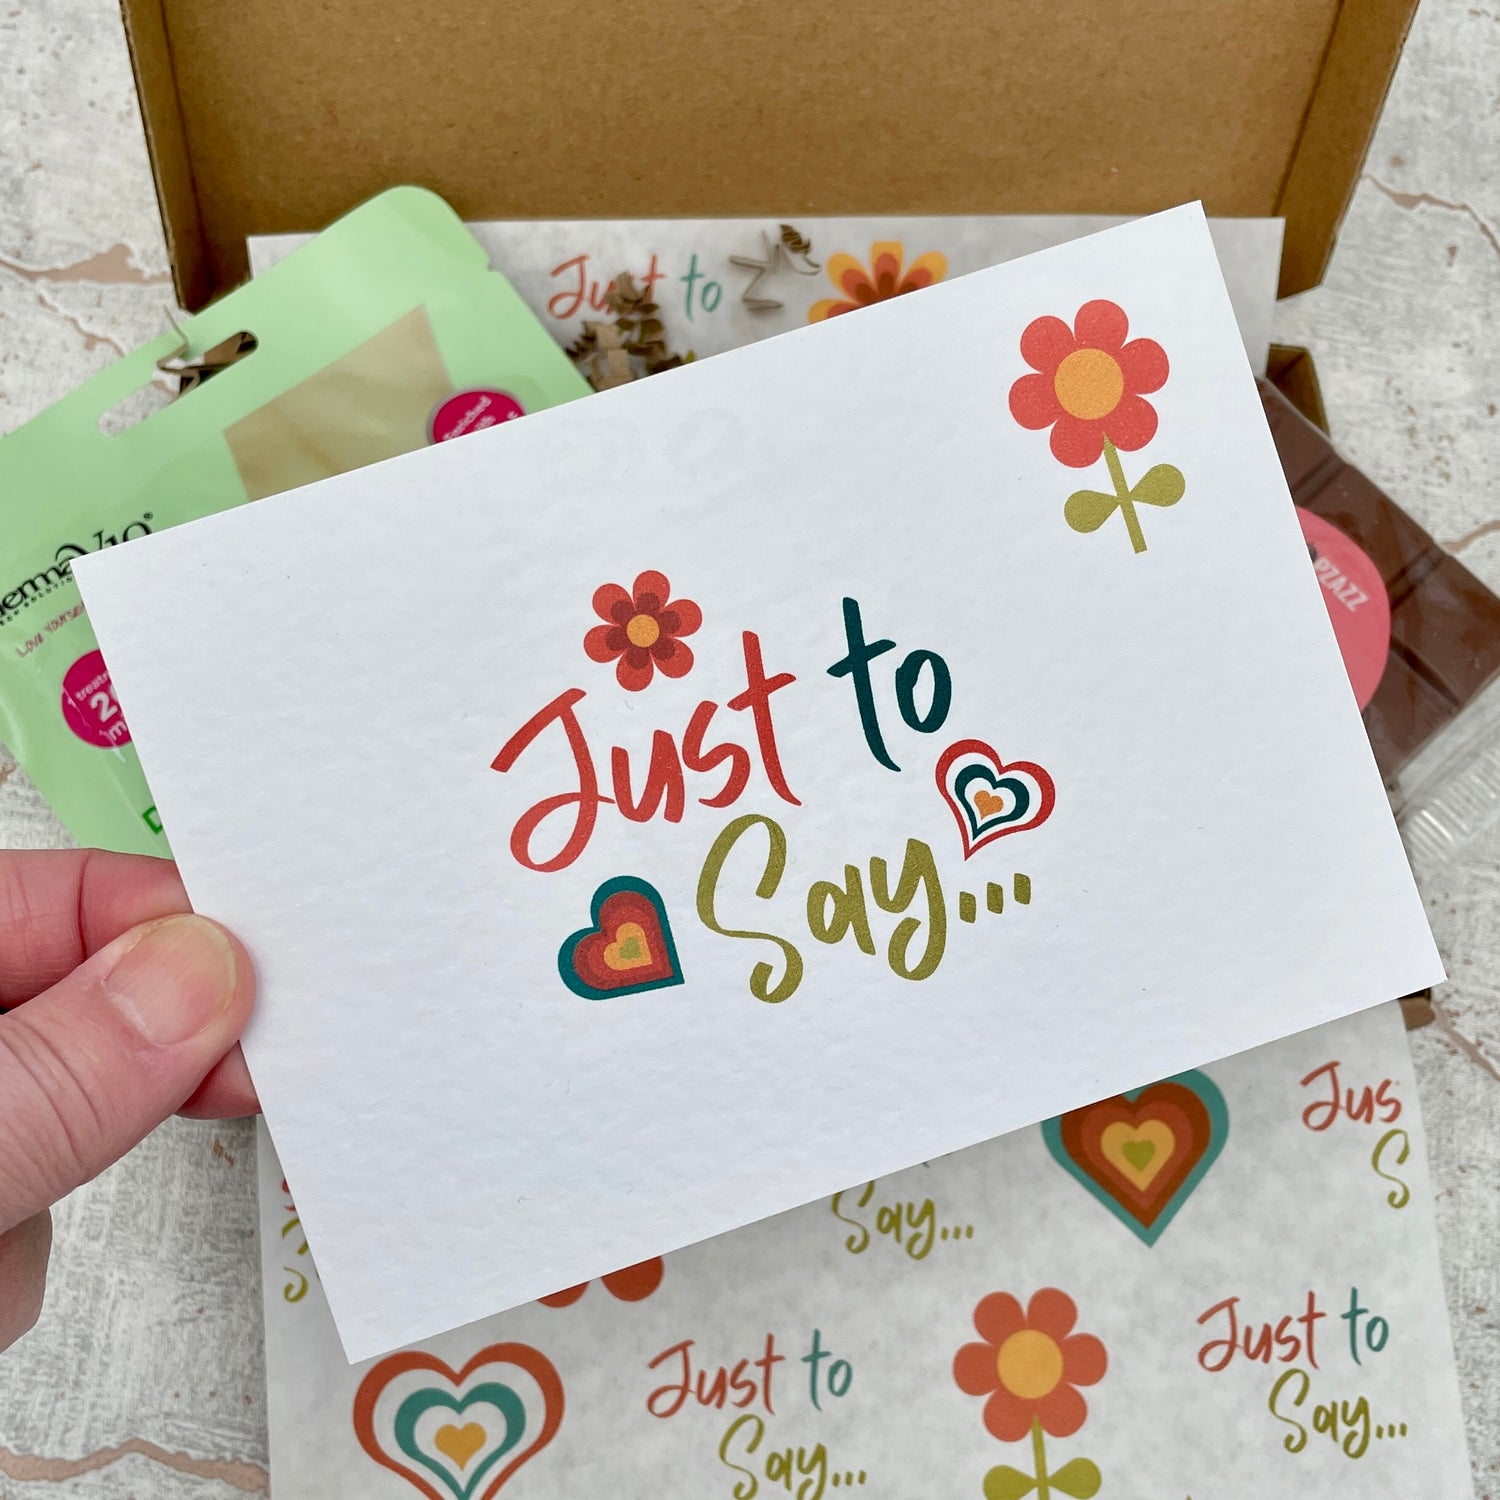 "Just to Say..." A6 Card